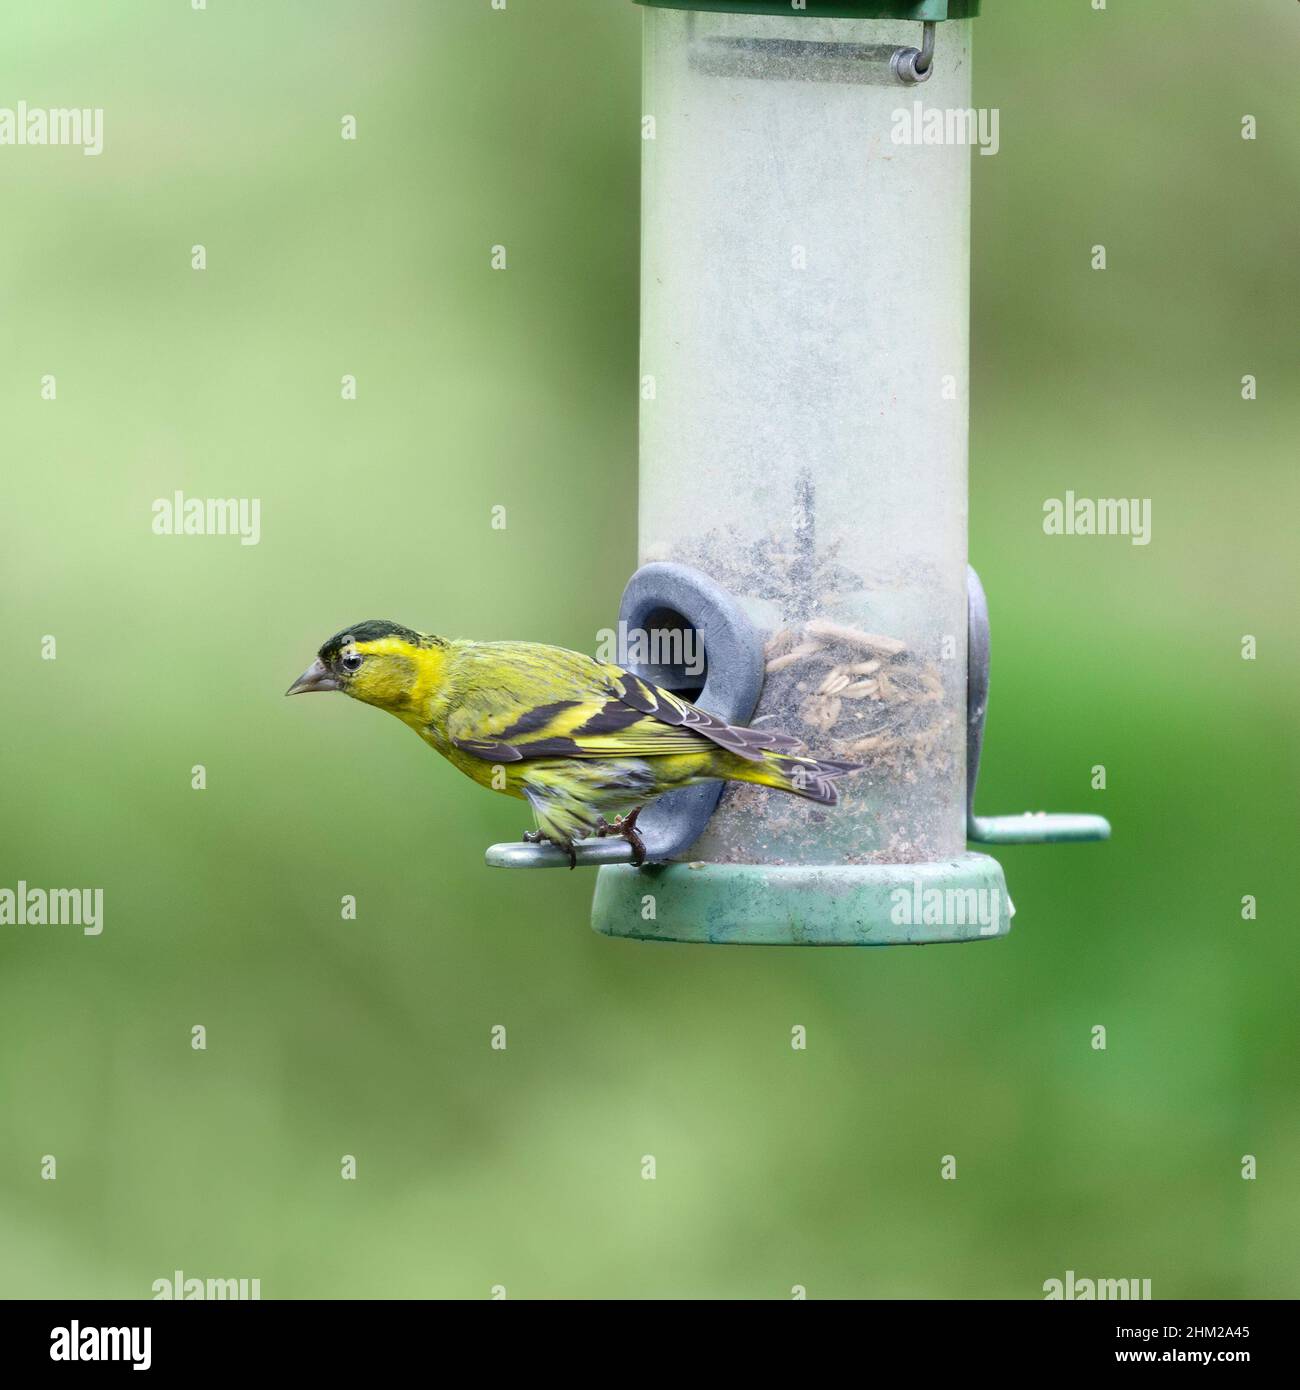 Eurasian Siskin, Spinus sinus, fka Carduelis spinus. A male bird clinging onto a bird feeder looking outwards against a defocussed natural background Stock Photo